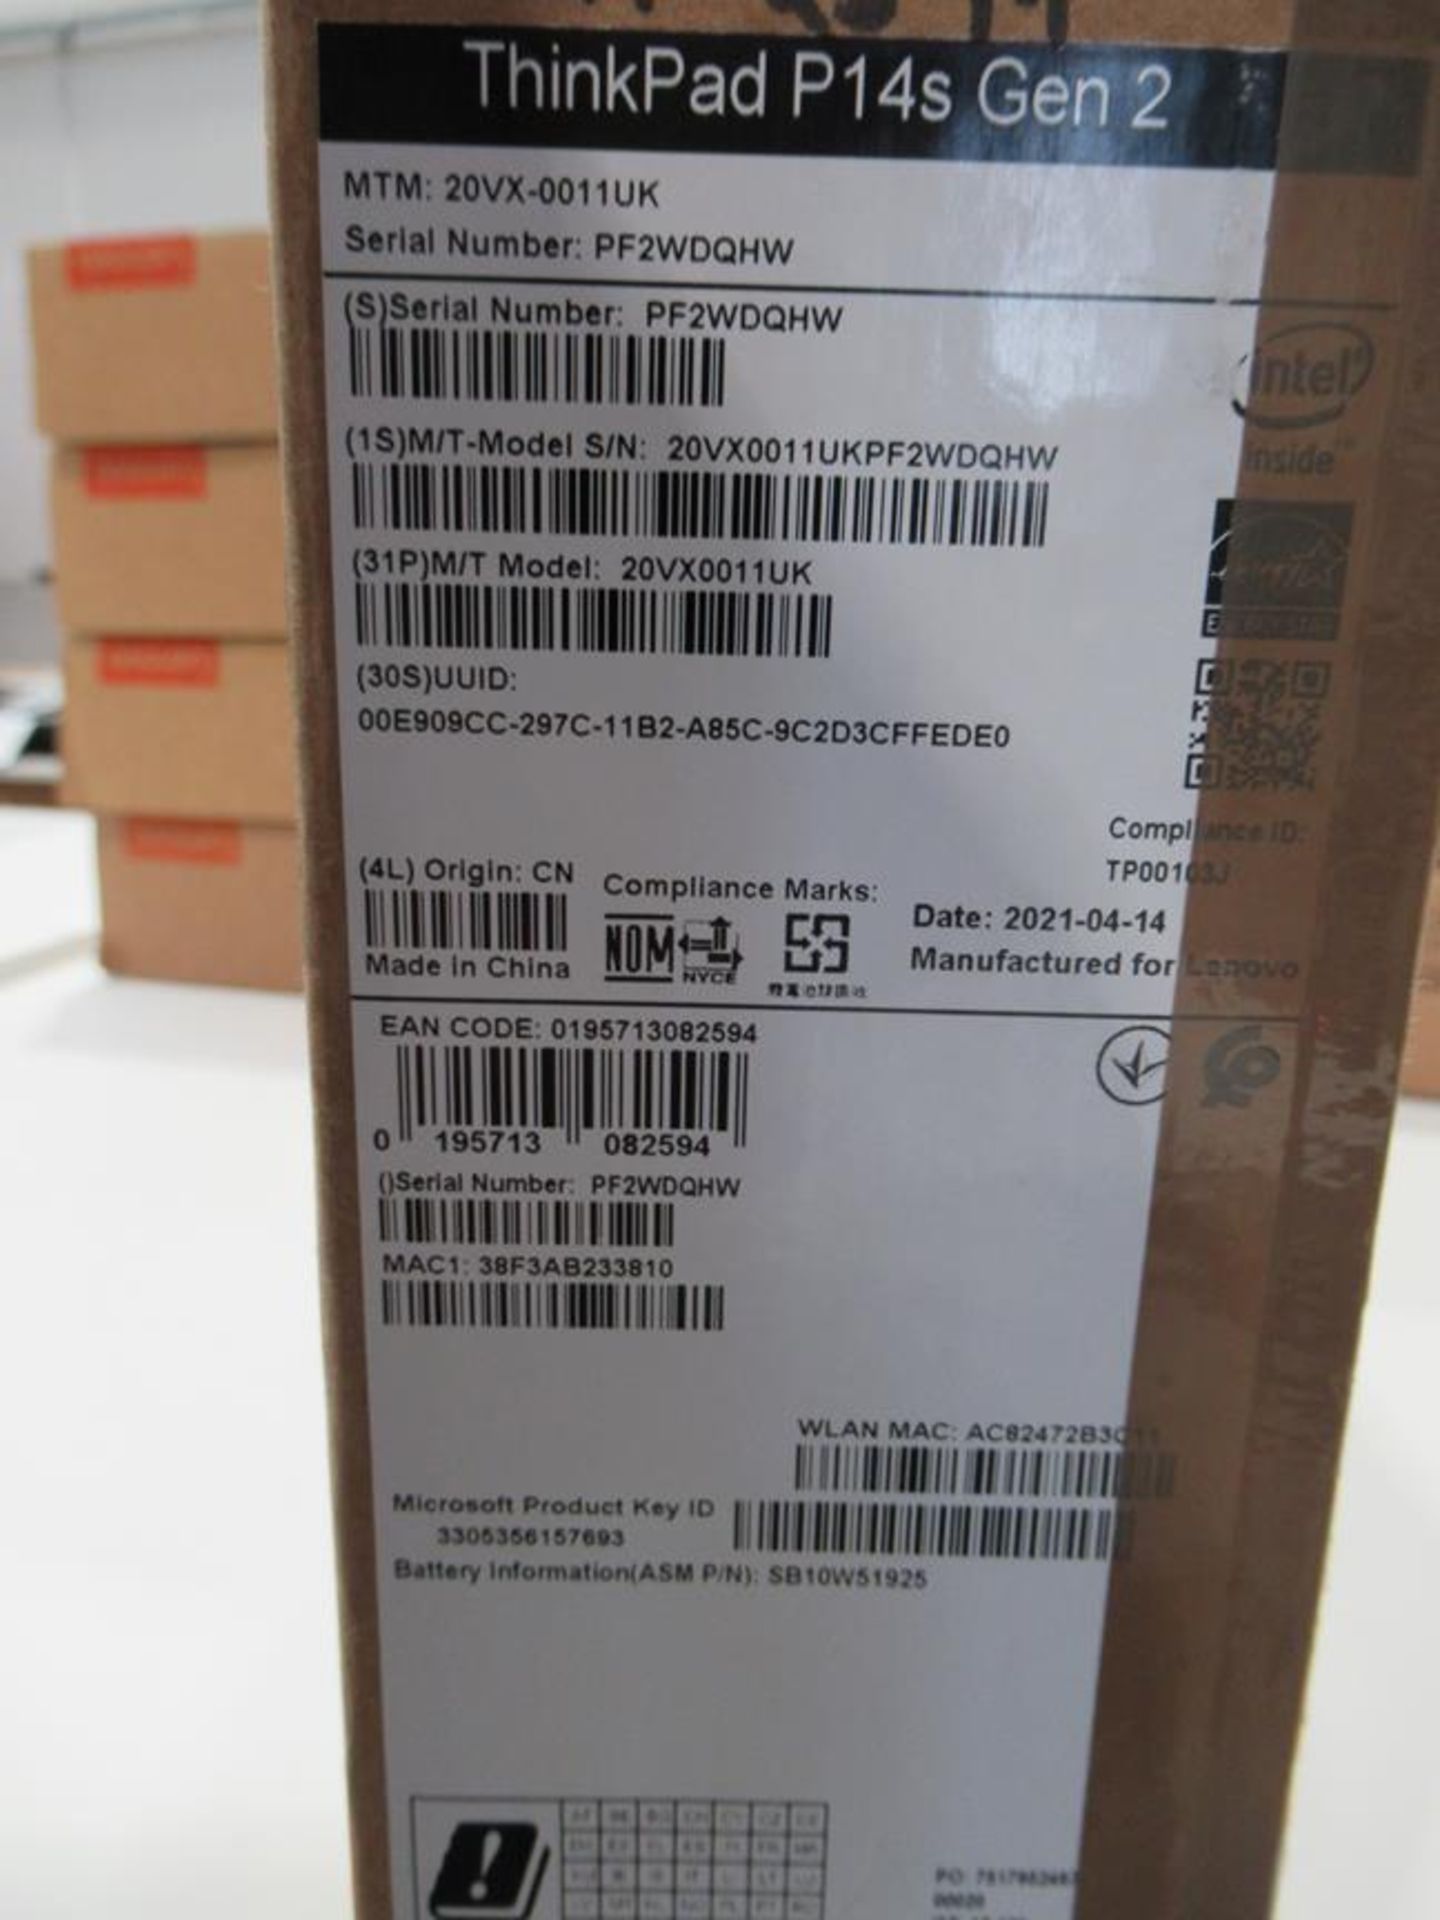 ThinkPad, P14s Gen 2 standard specification (boxed) - Image 2 of 3